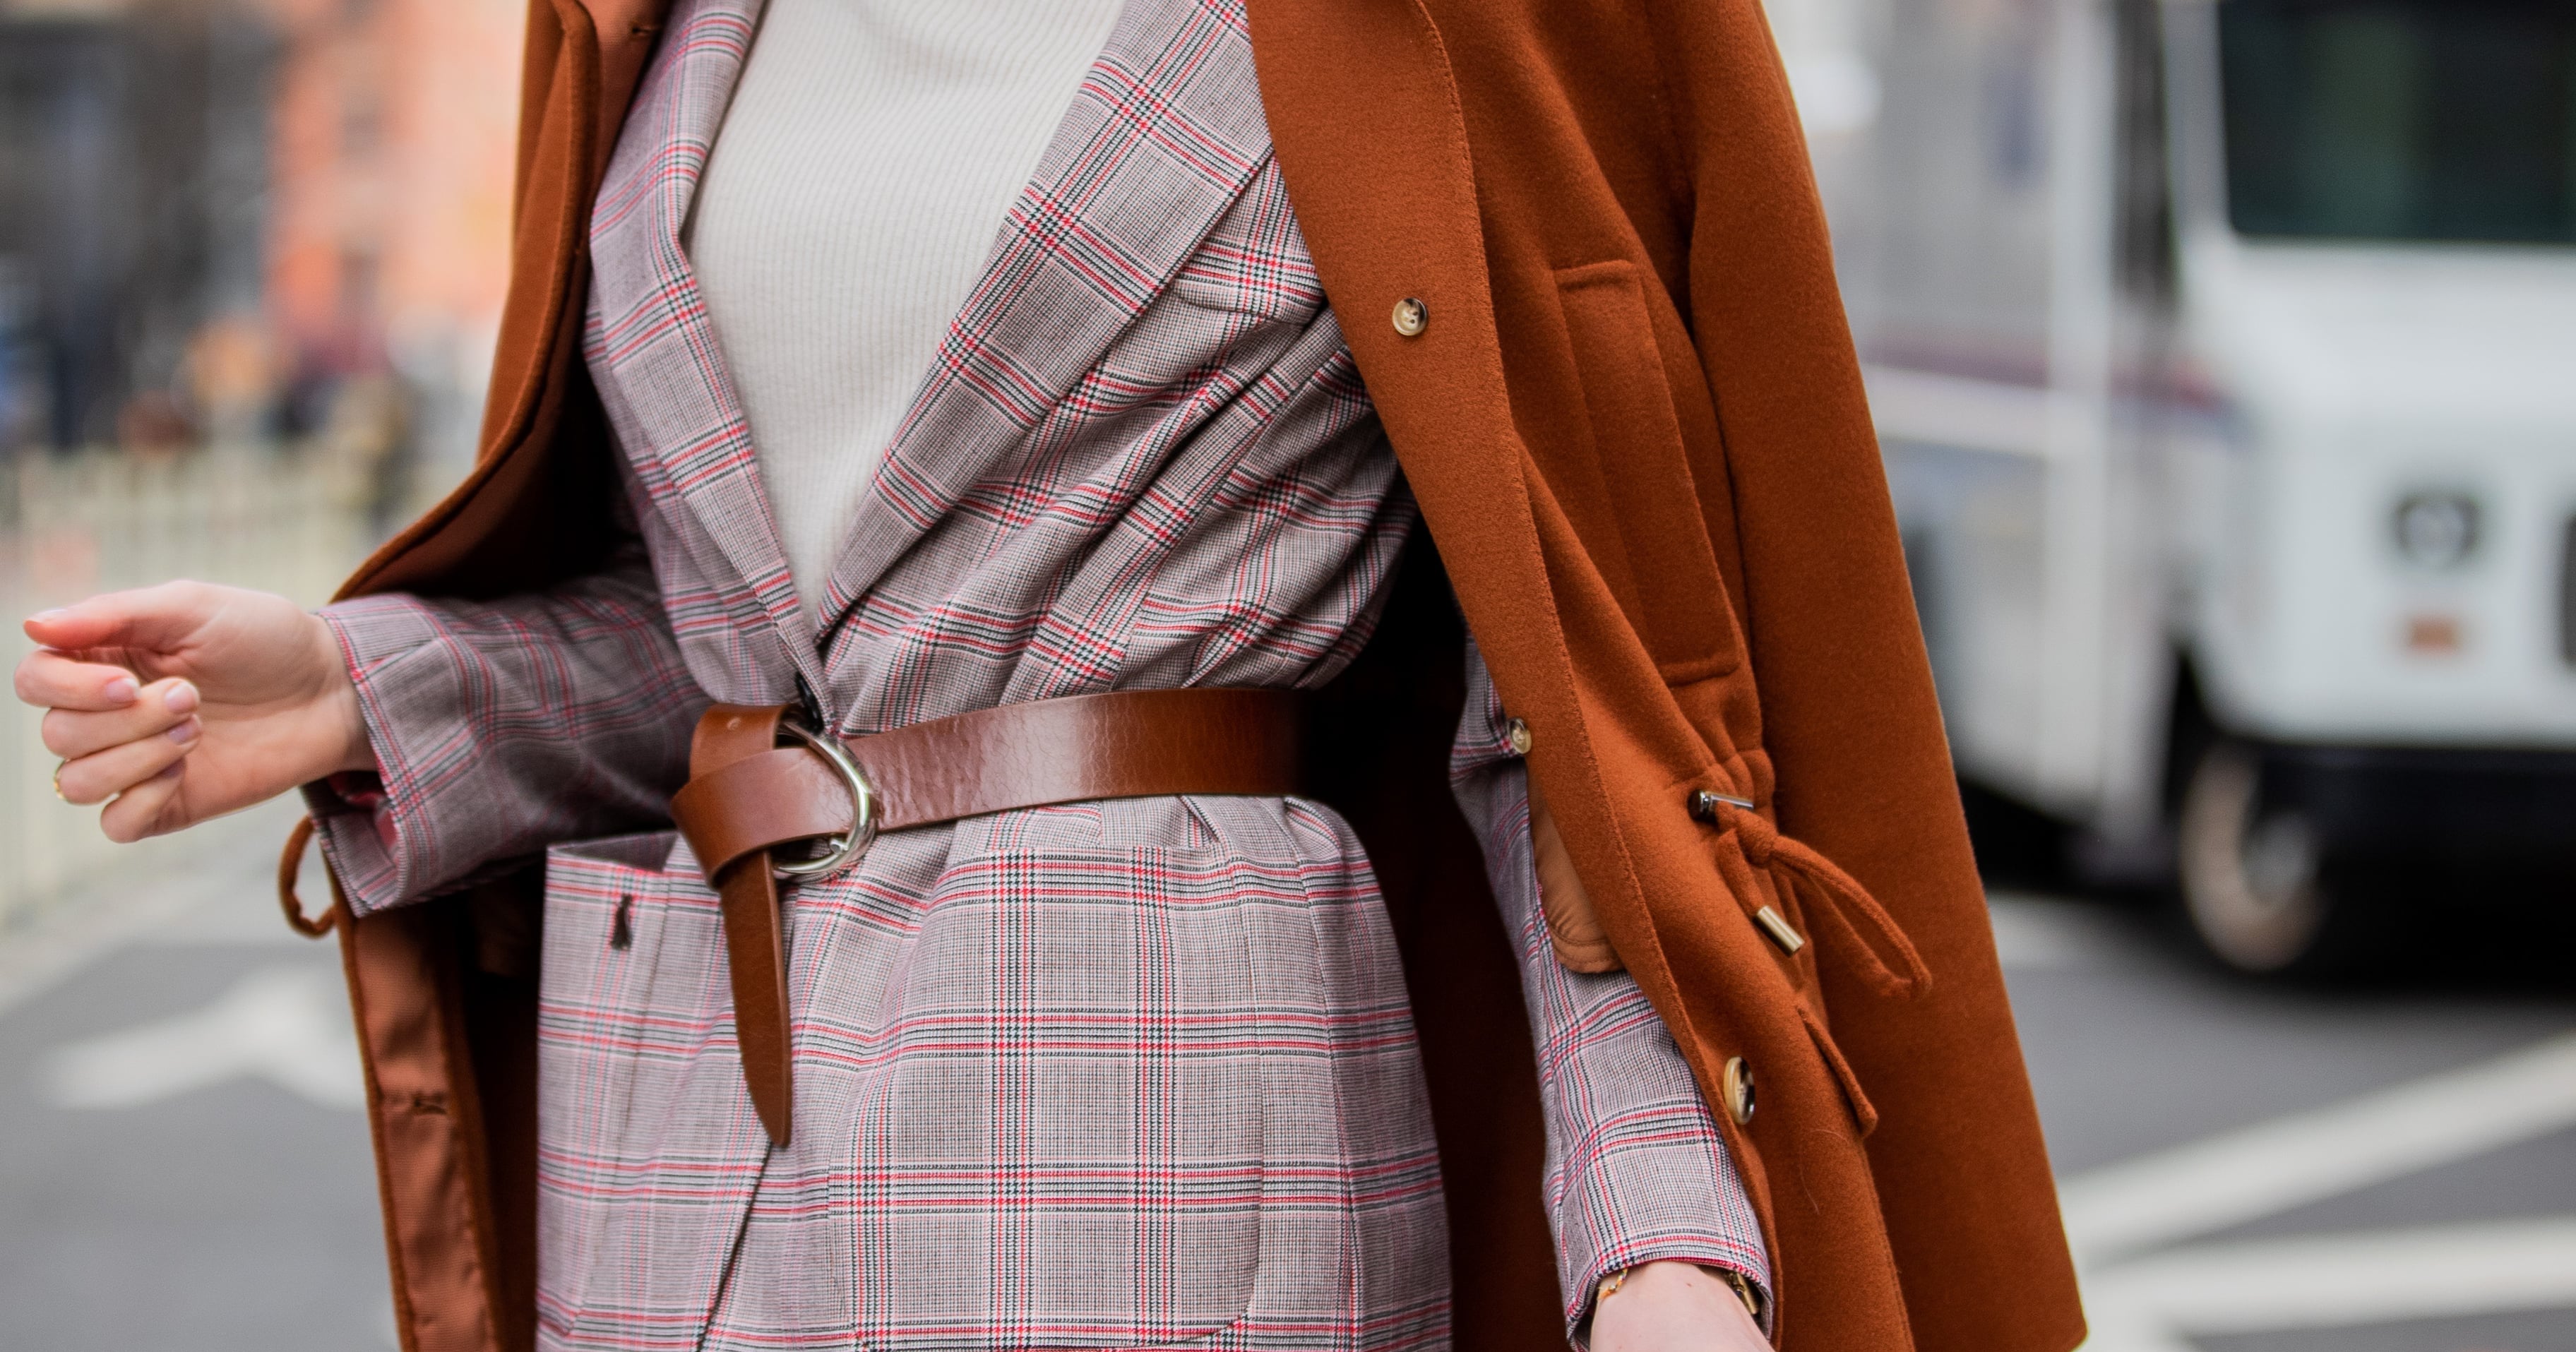 valentino belt outfit ideas